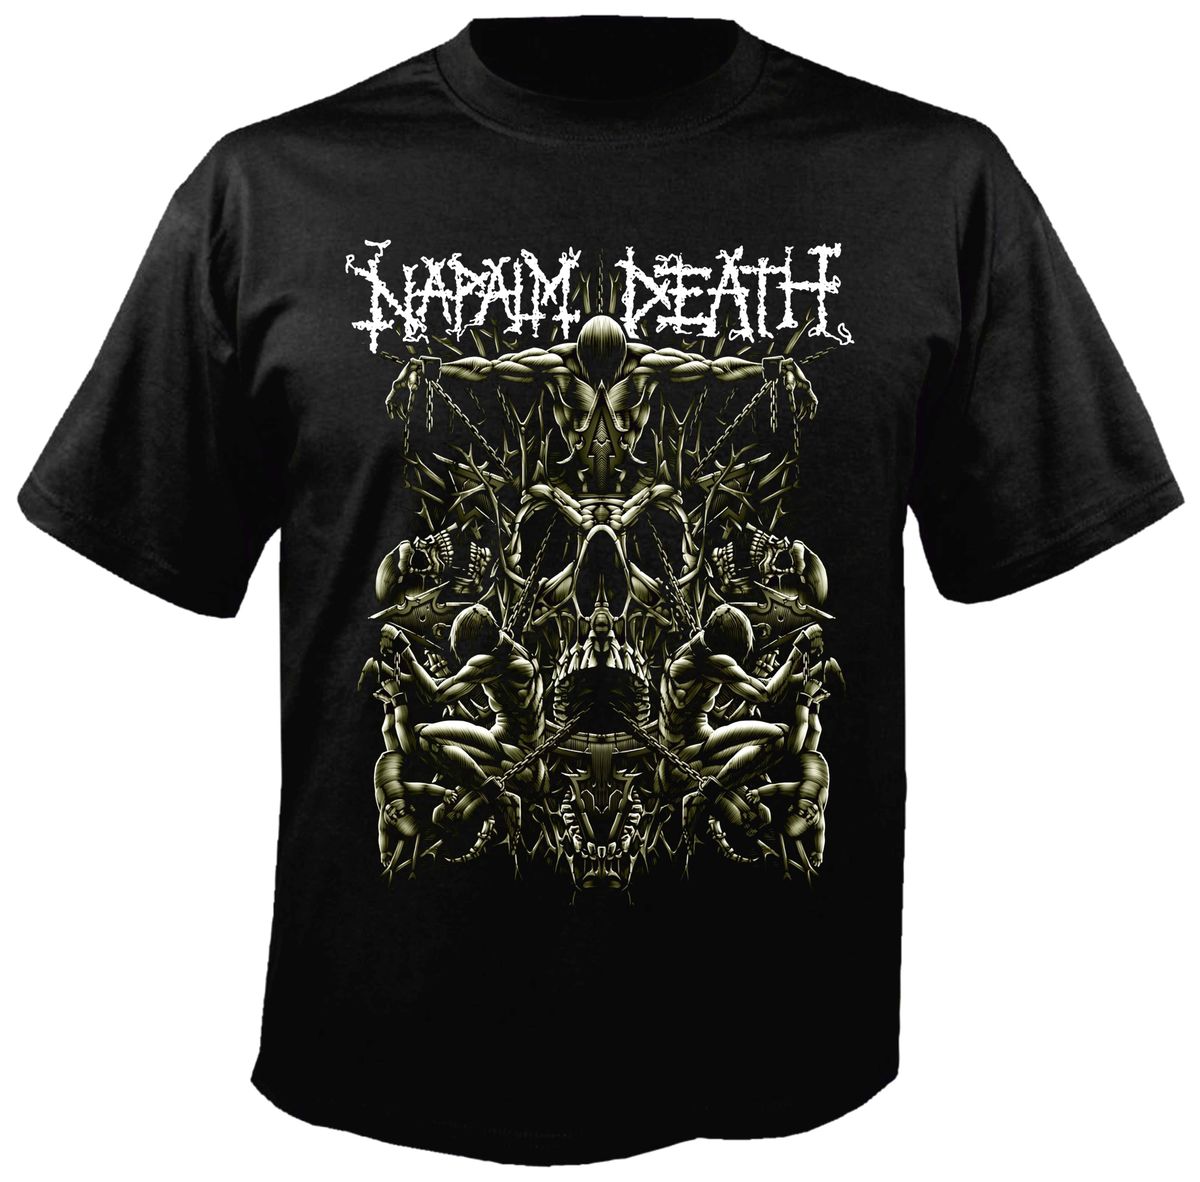 Napalm Death T-Shirt – Metal & Rock T-shirts and Accessories